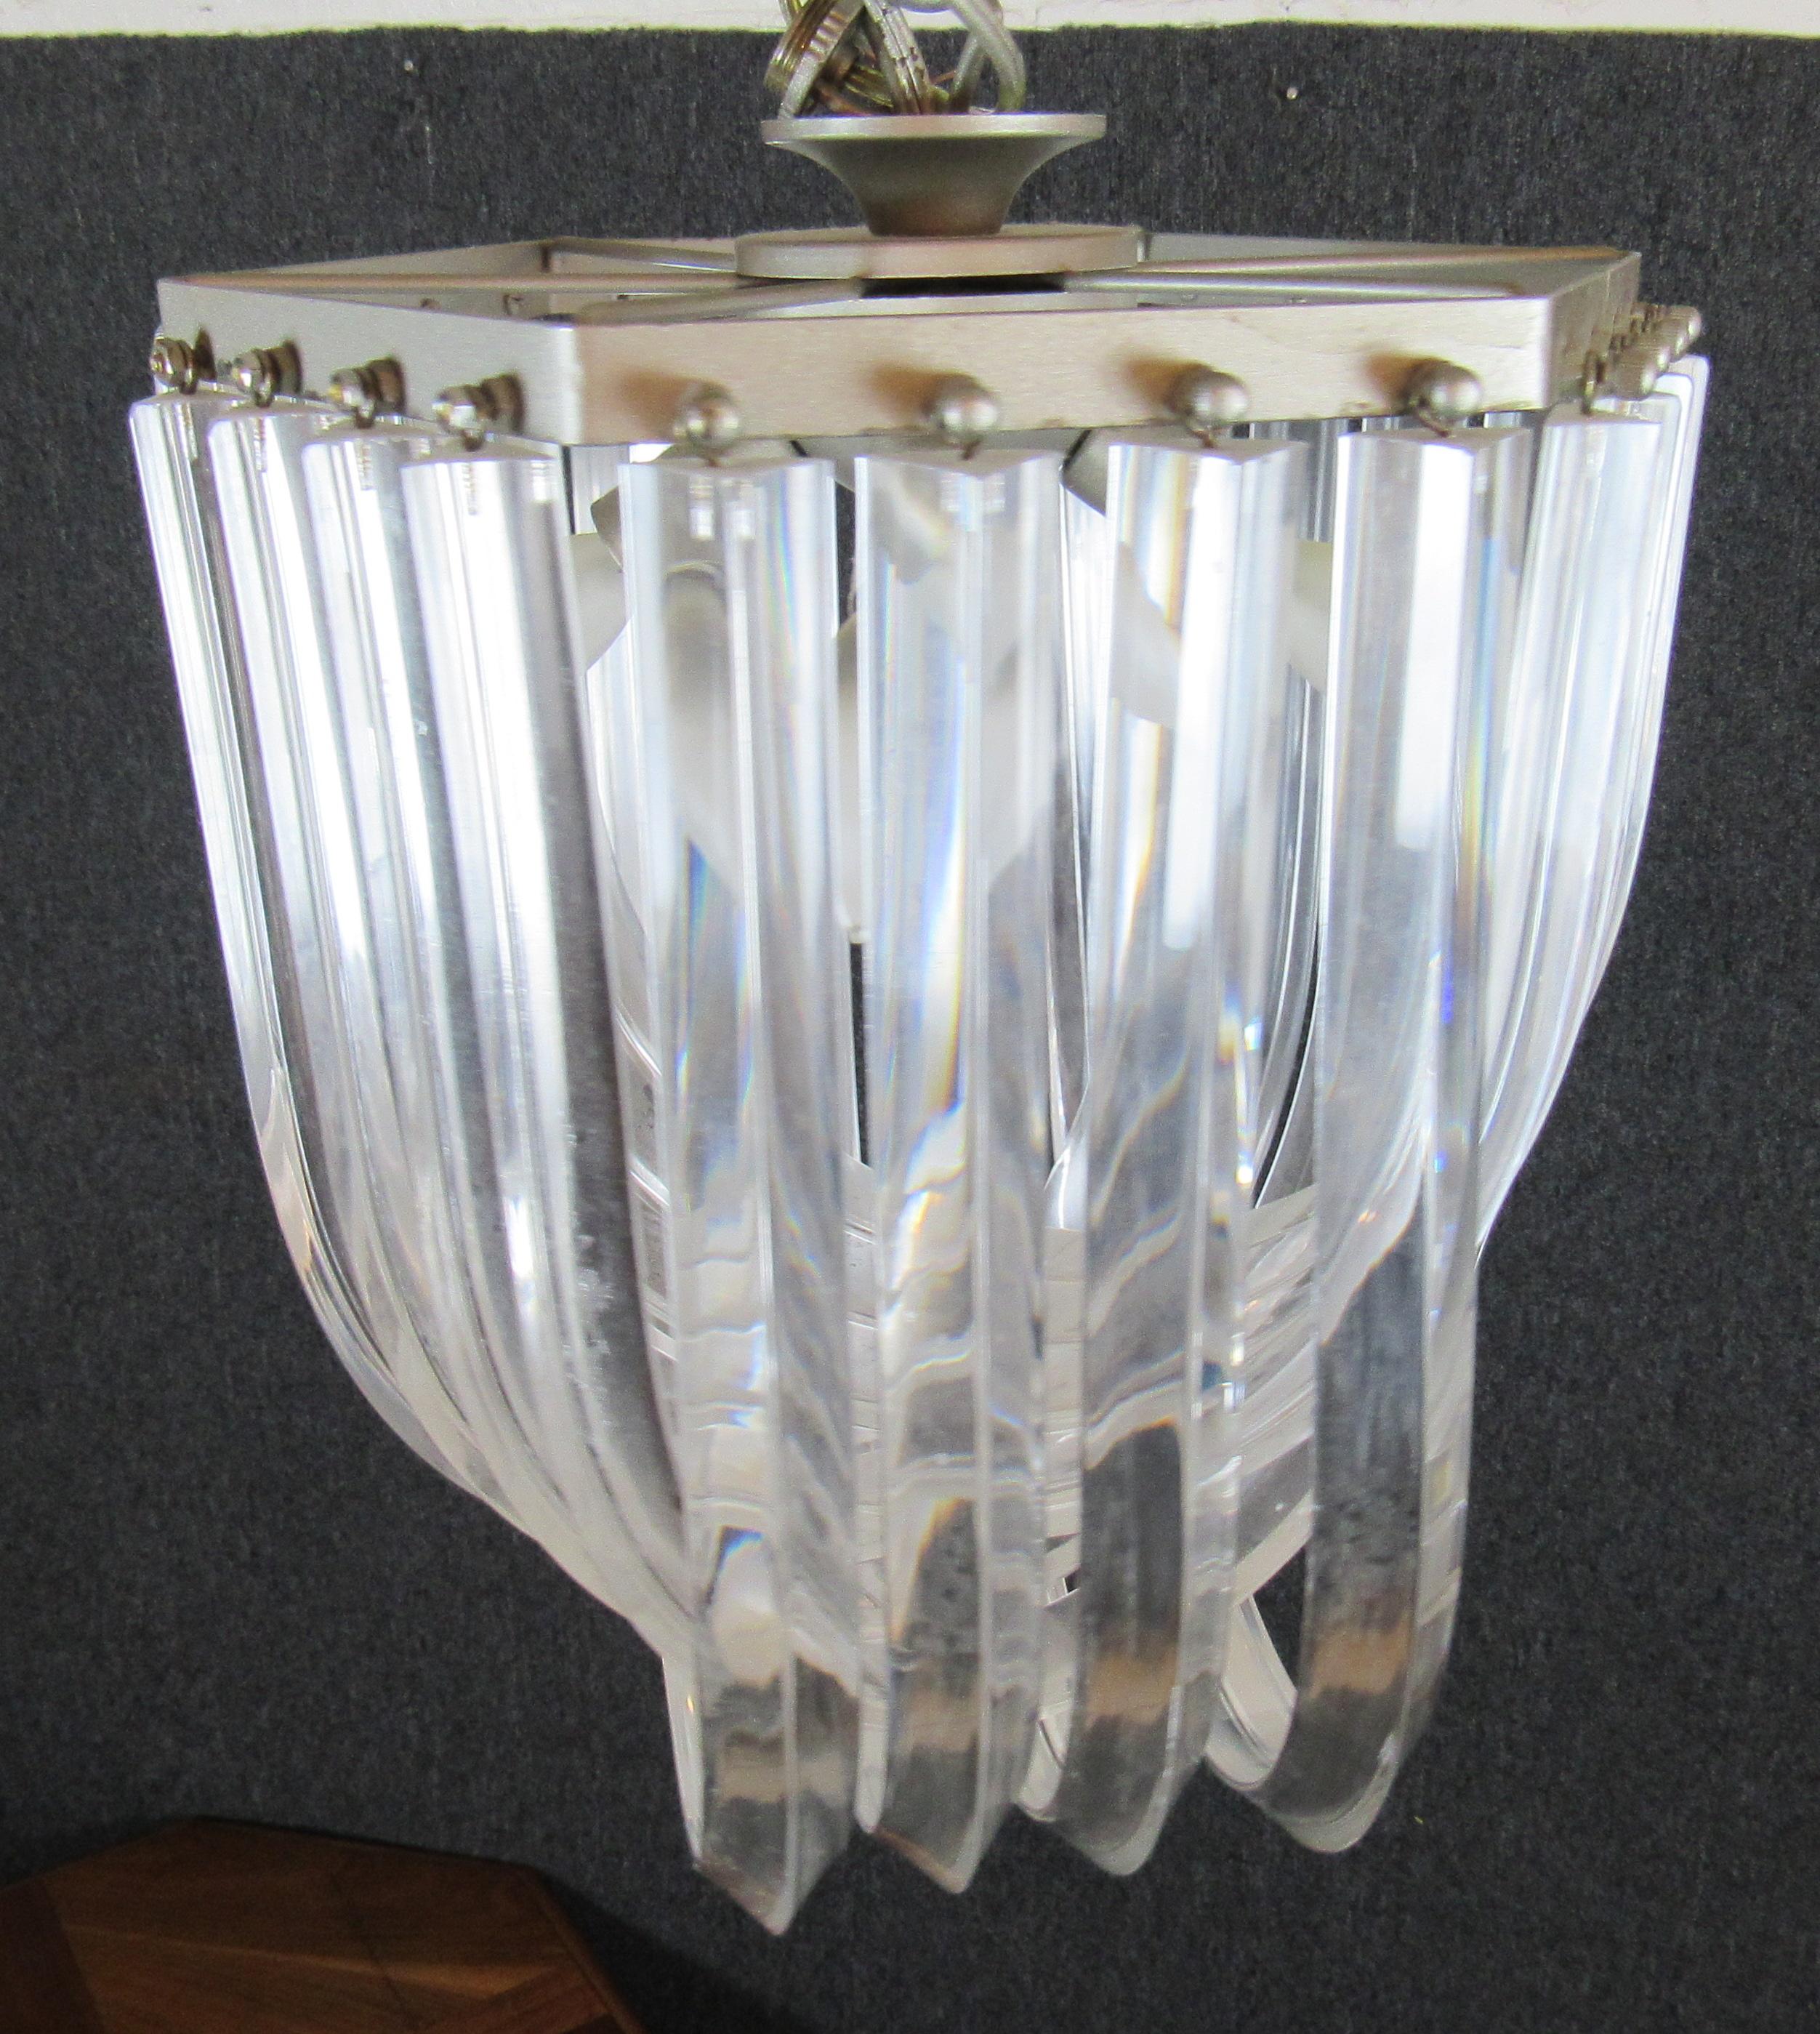 Vintage modern chandelier with banded lucite. Ribbon bands with a cascading style attached to a chrome frame.
Please confirm location.